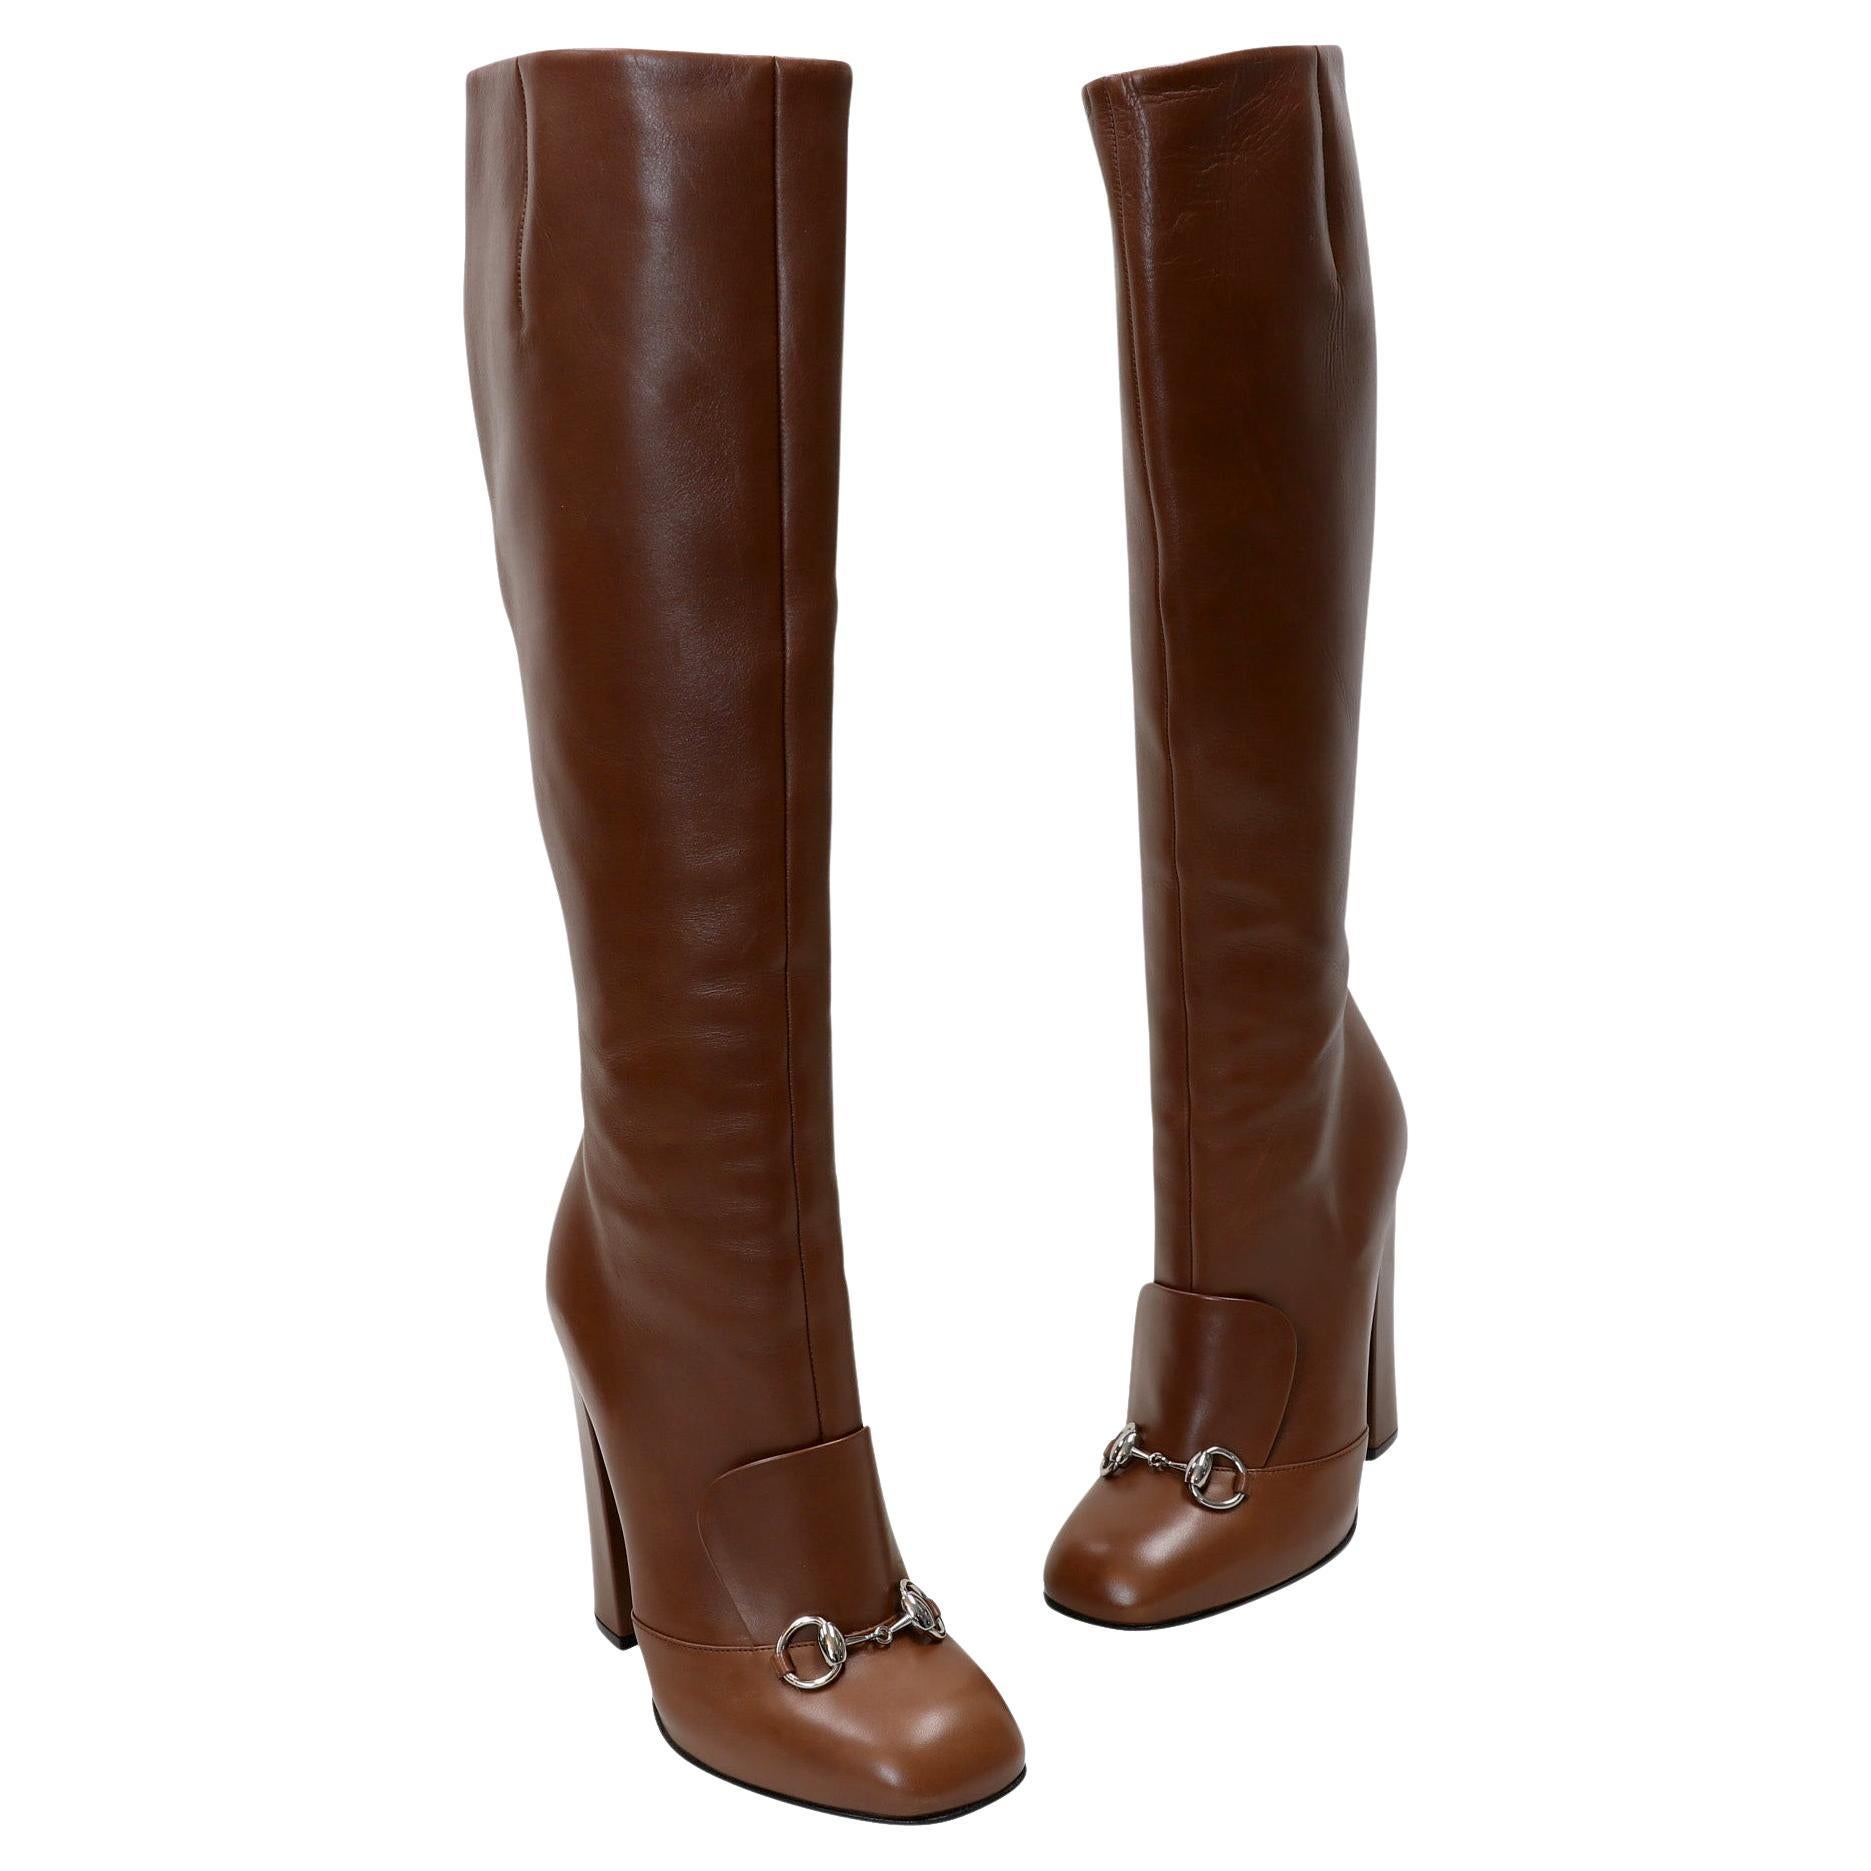 Gucci Brown Leather Horsebit Knee High Riding Boots 39.5 GG-S1111P-0001 For Sale